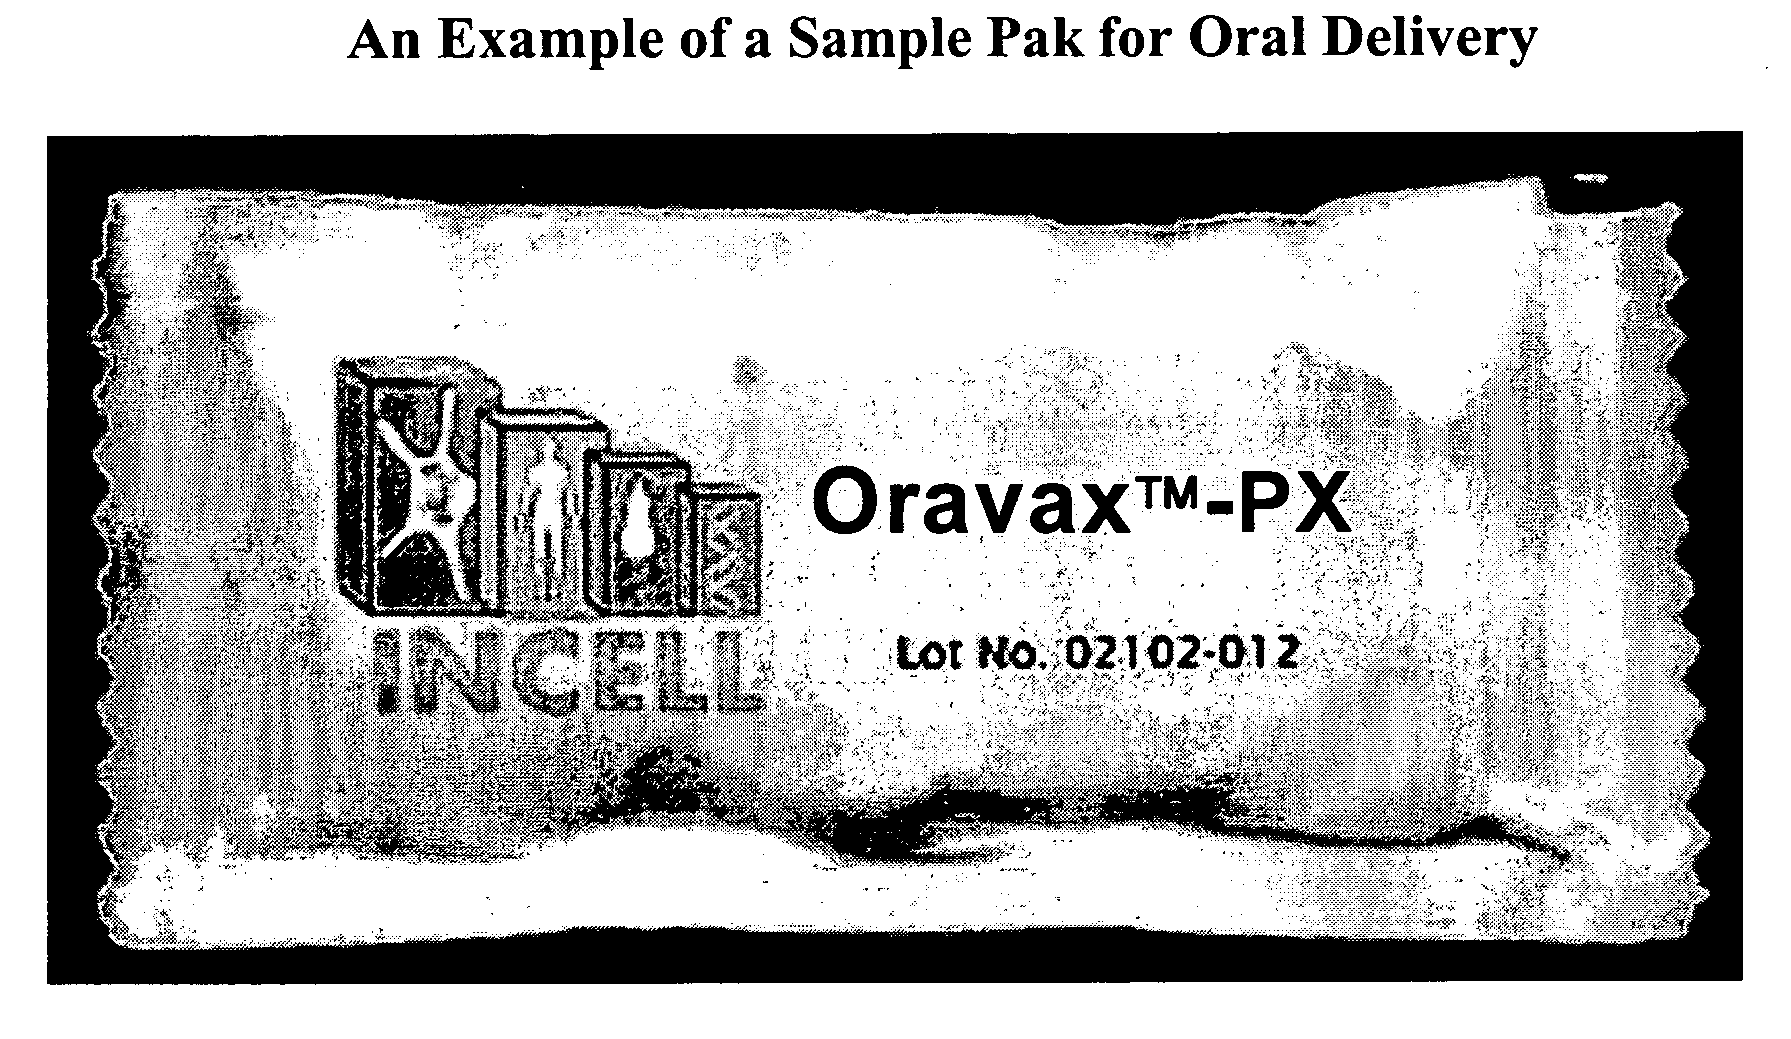 Oral smallpox vaccine production and methods to evaluate safety, efficacy, and potency of orally delivered vaccine